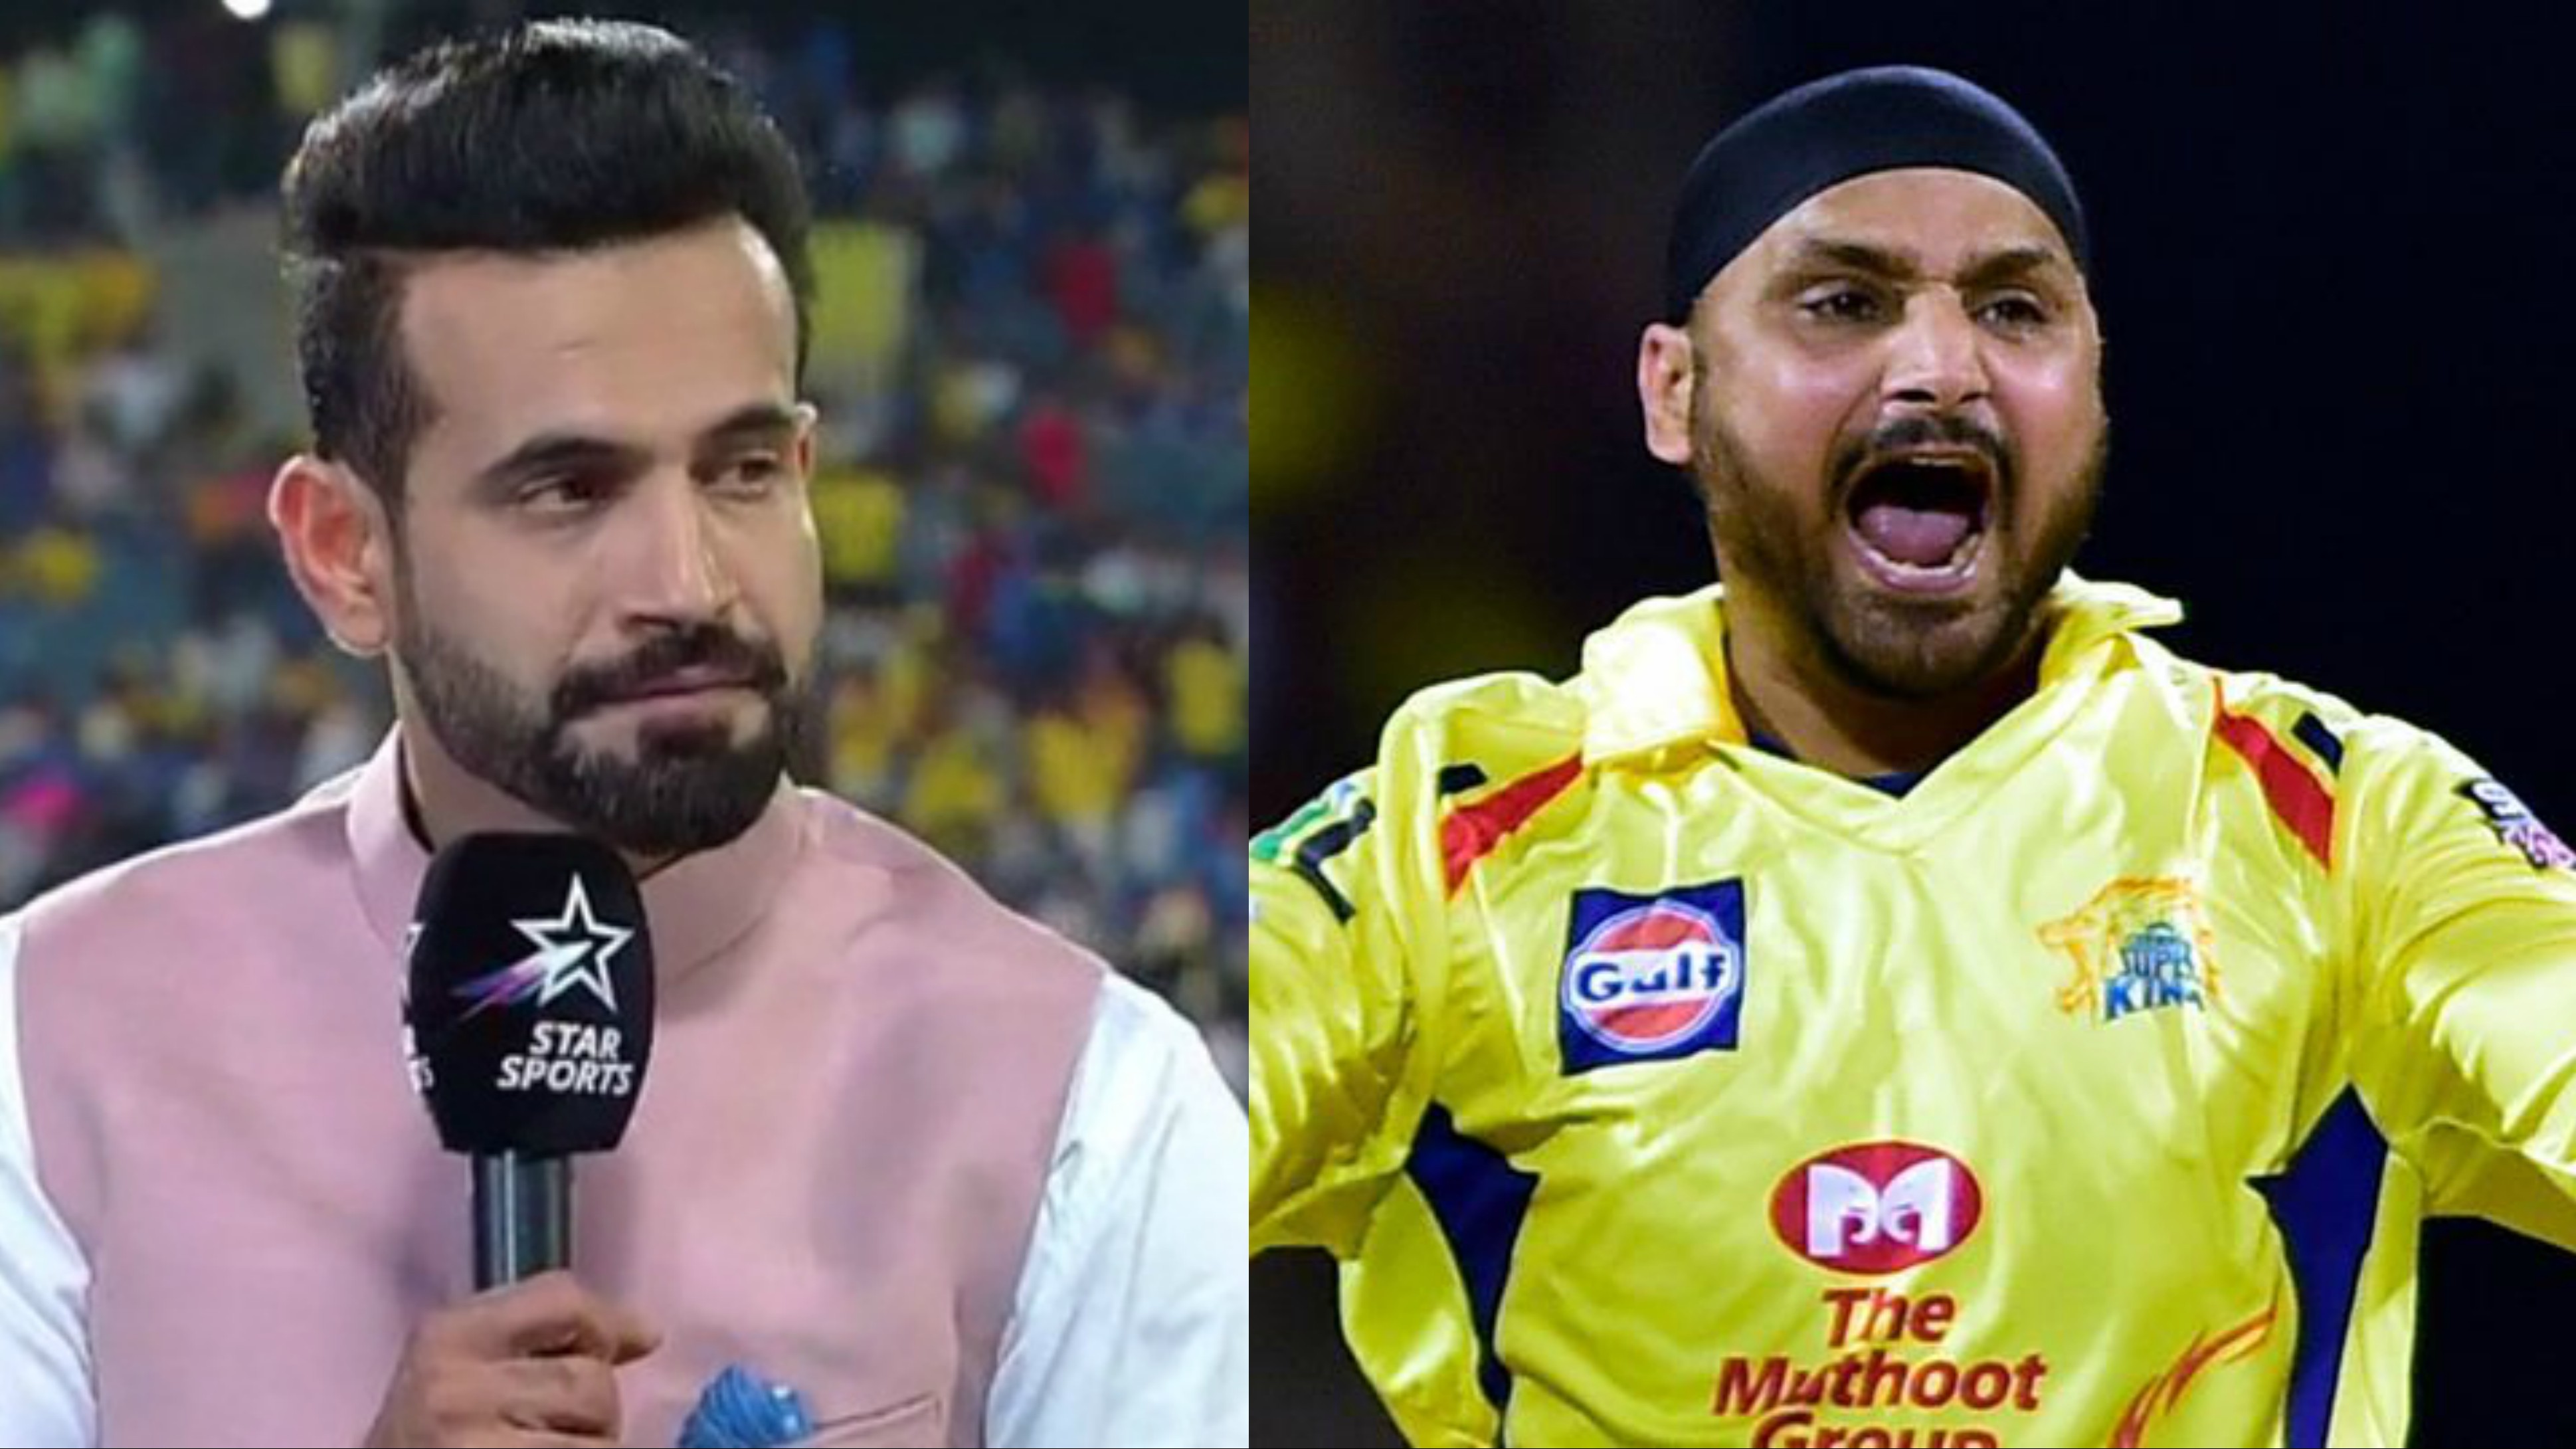 IPL 2020: Difficult for CSK to replace Harbhajan Singh, says Irfan Pathan; has hopes of Raina's return